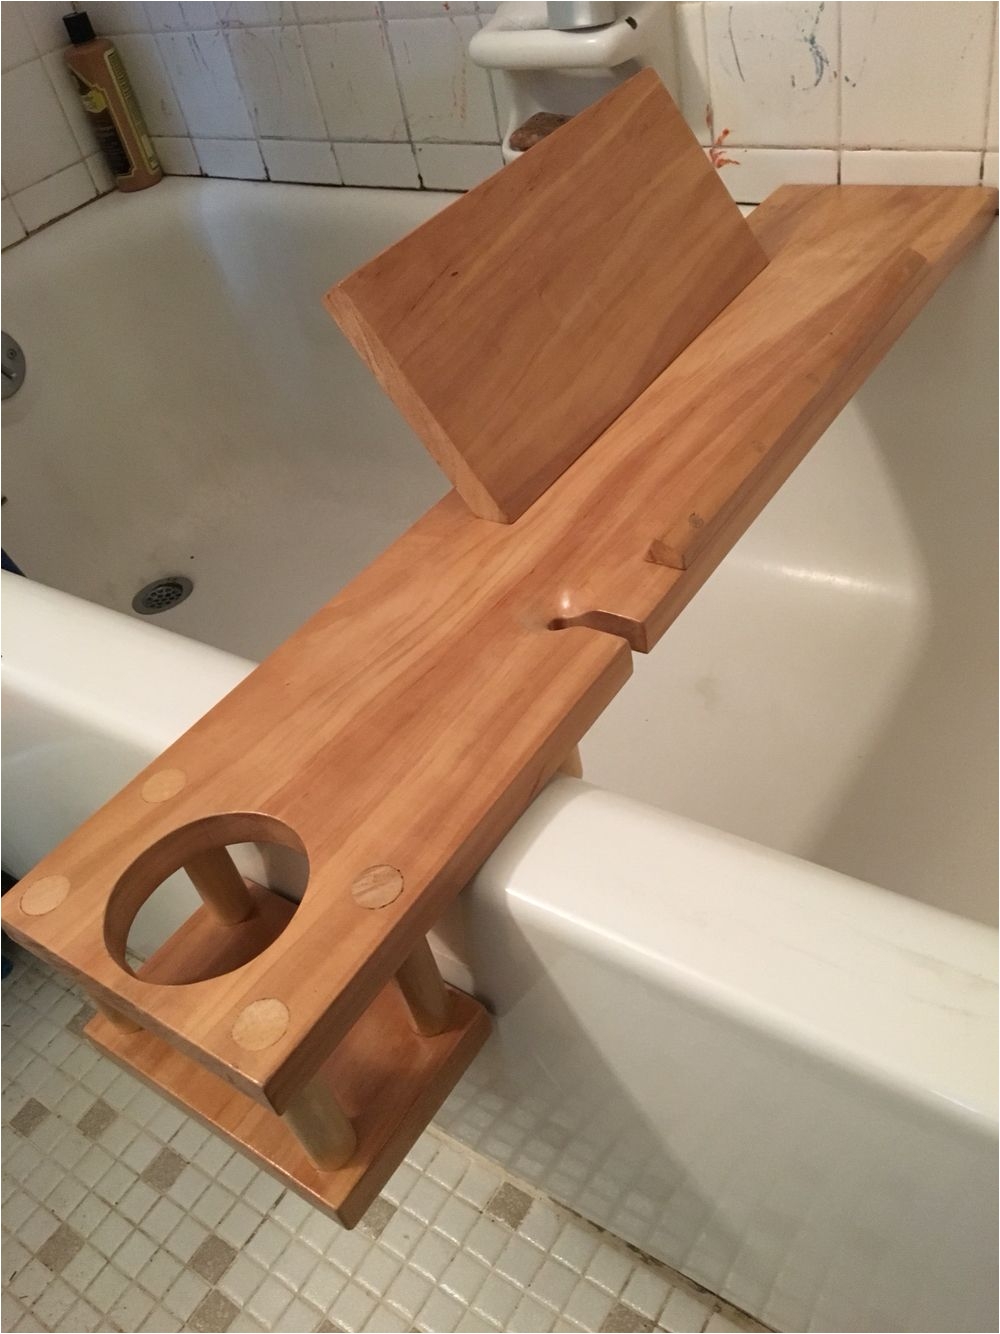 bathtub buddy for my wife it holds a book or tablet so you can read